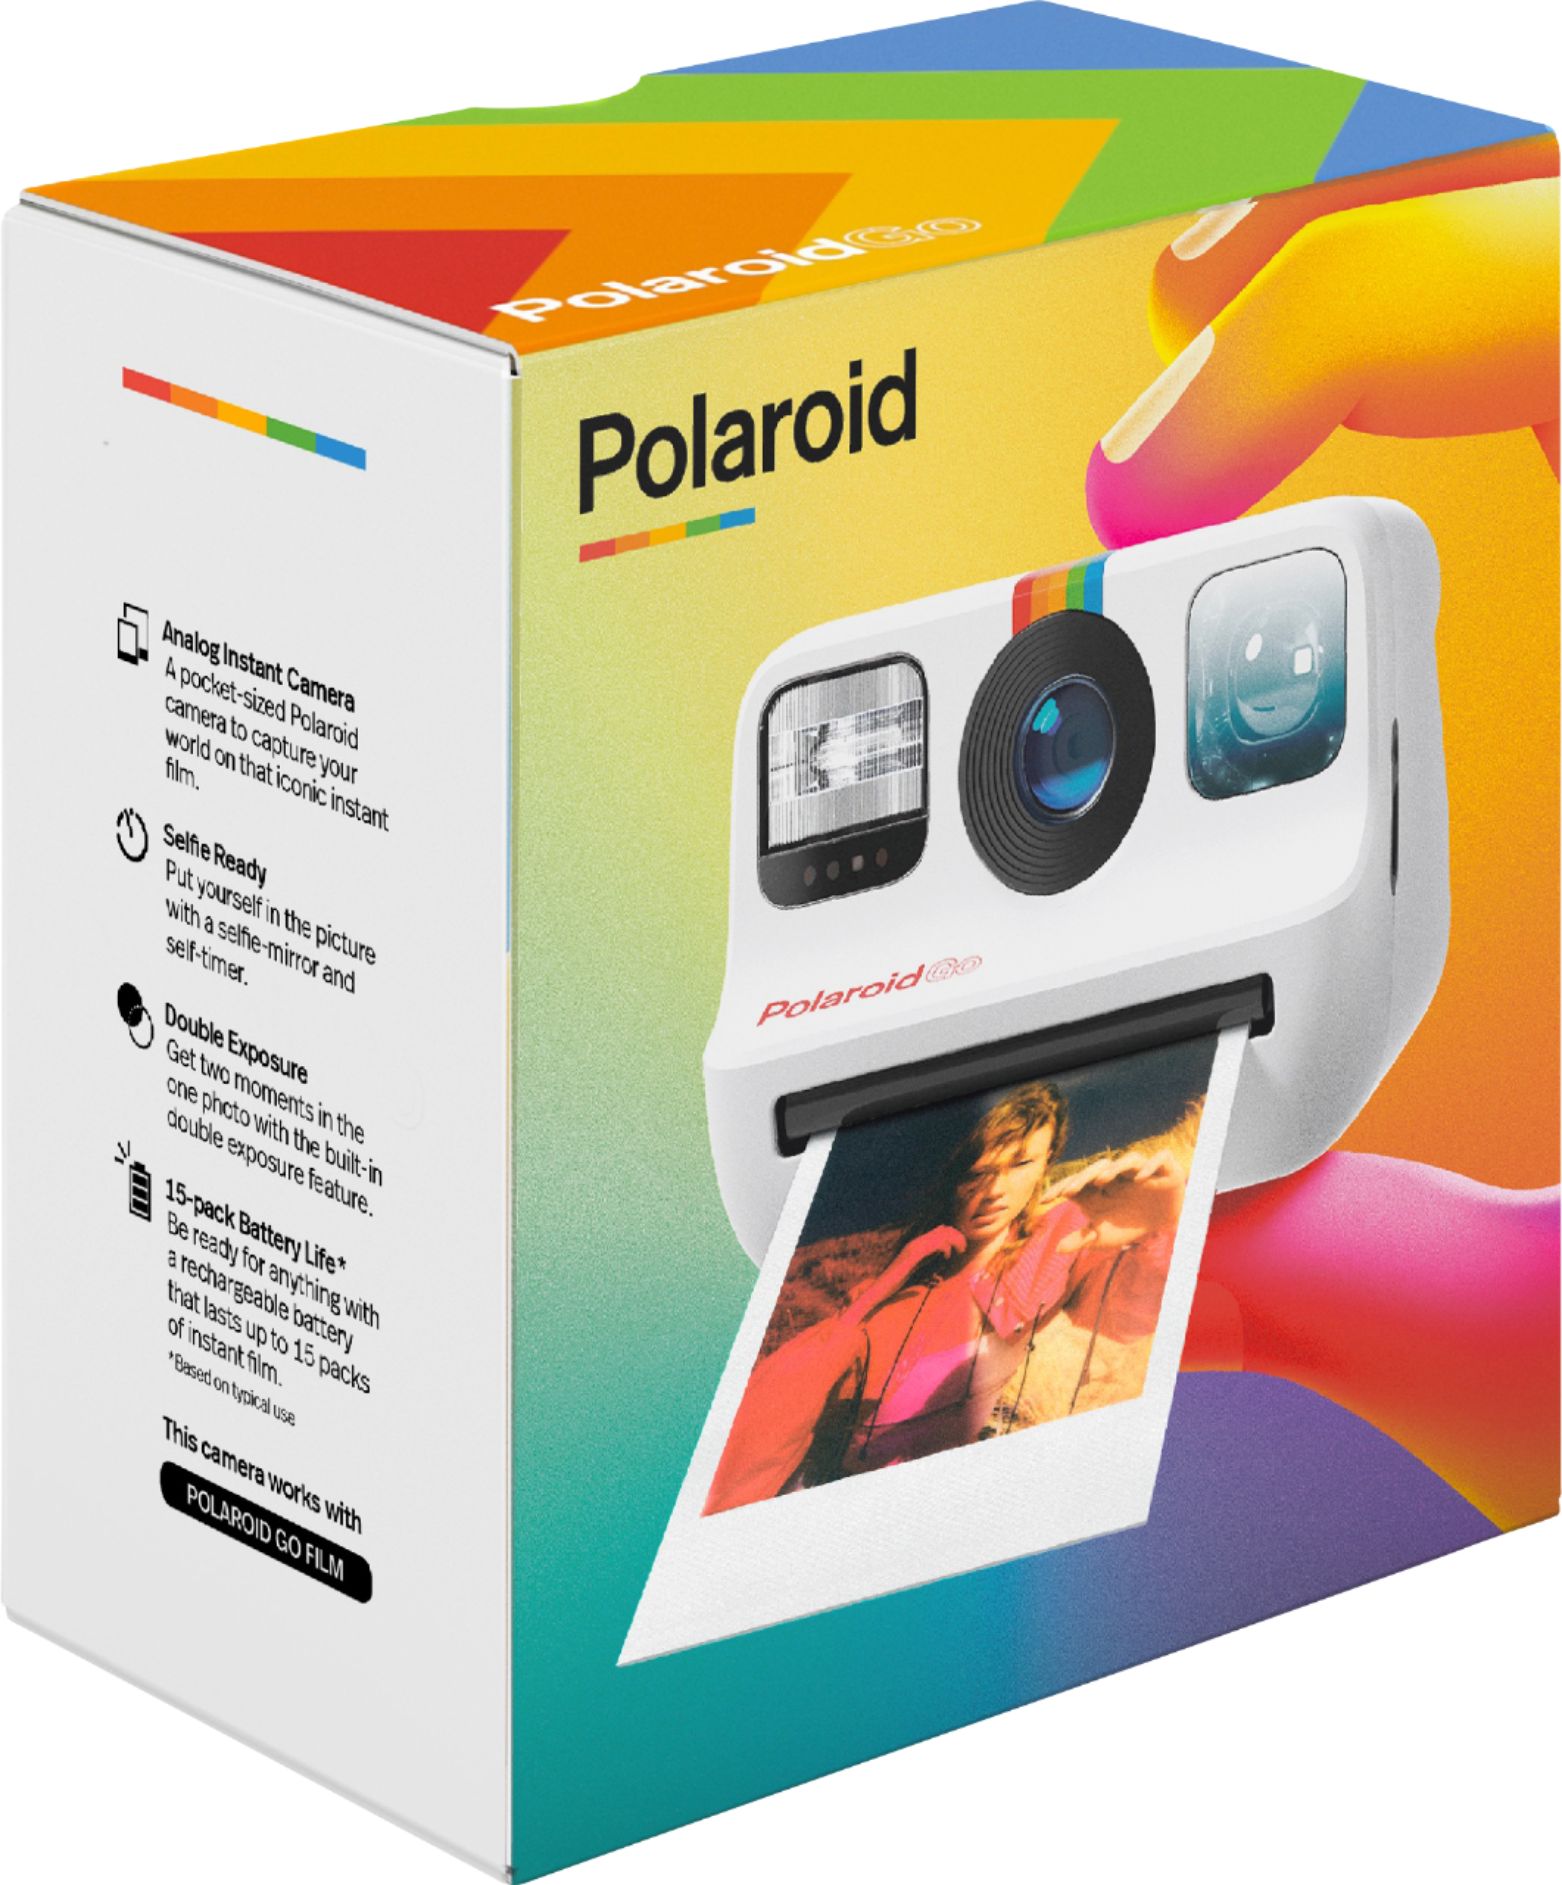 Polaroid Go is an adorably small instant camera ready for summer - CNET